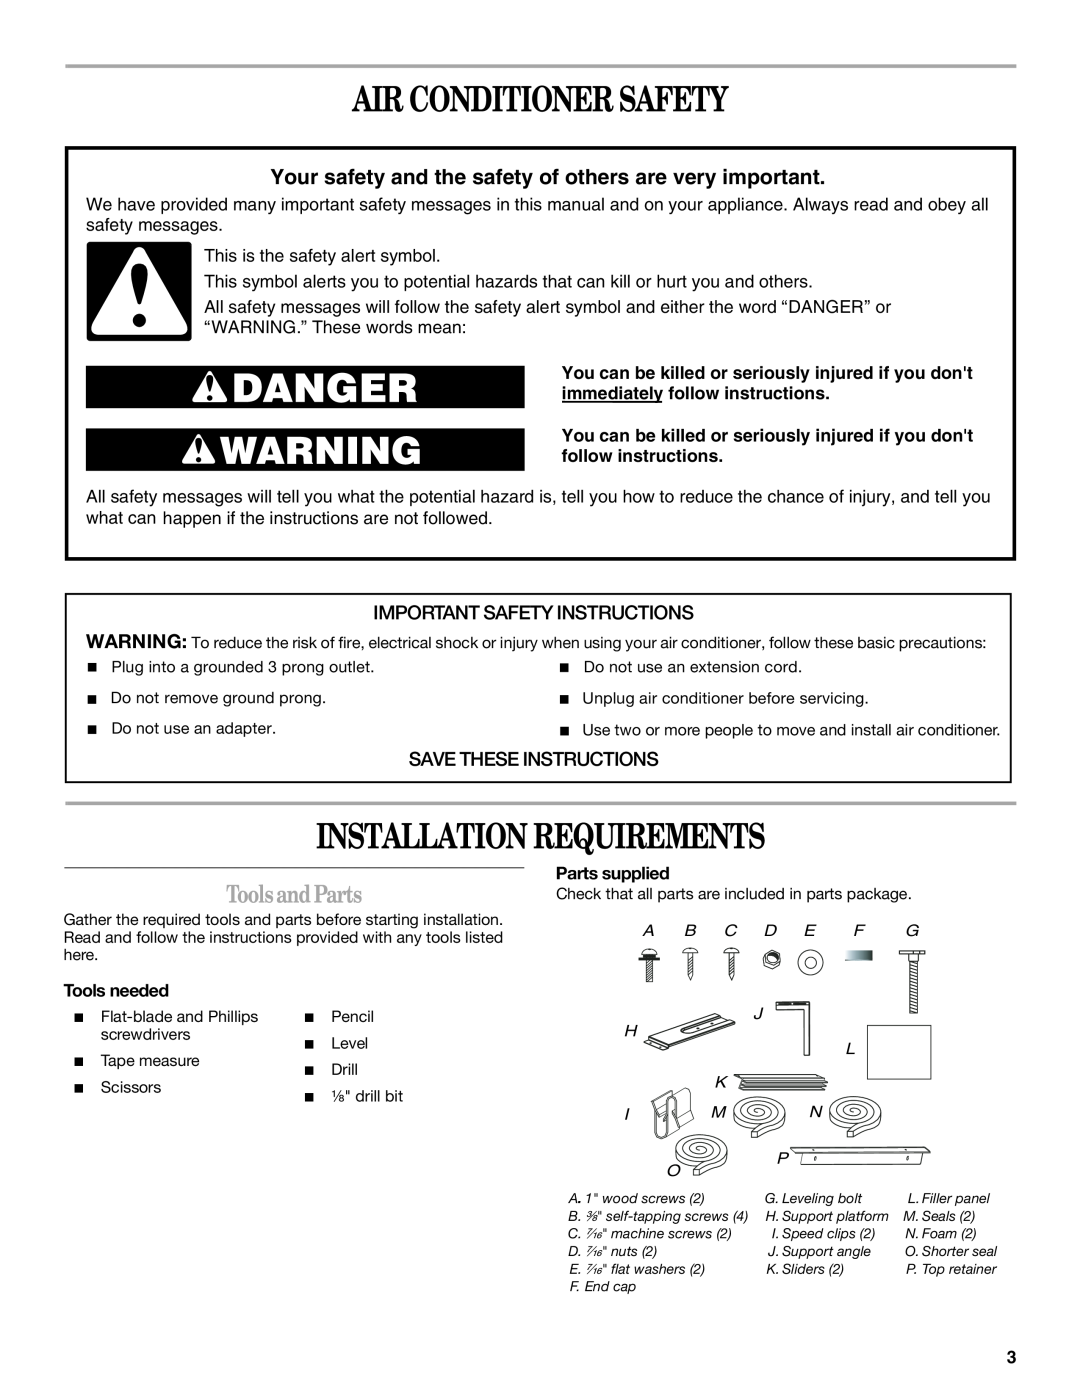 Whirlpool ACS088PR0 manual Air Conditioner Safety, Installation Requirements, ToolsandParts, Important Safety Instructions 